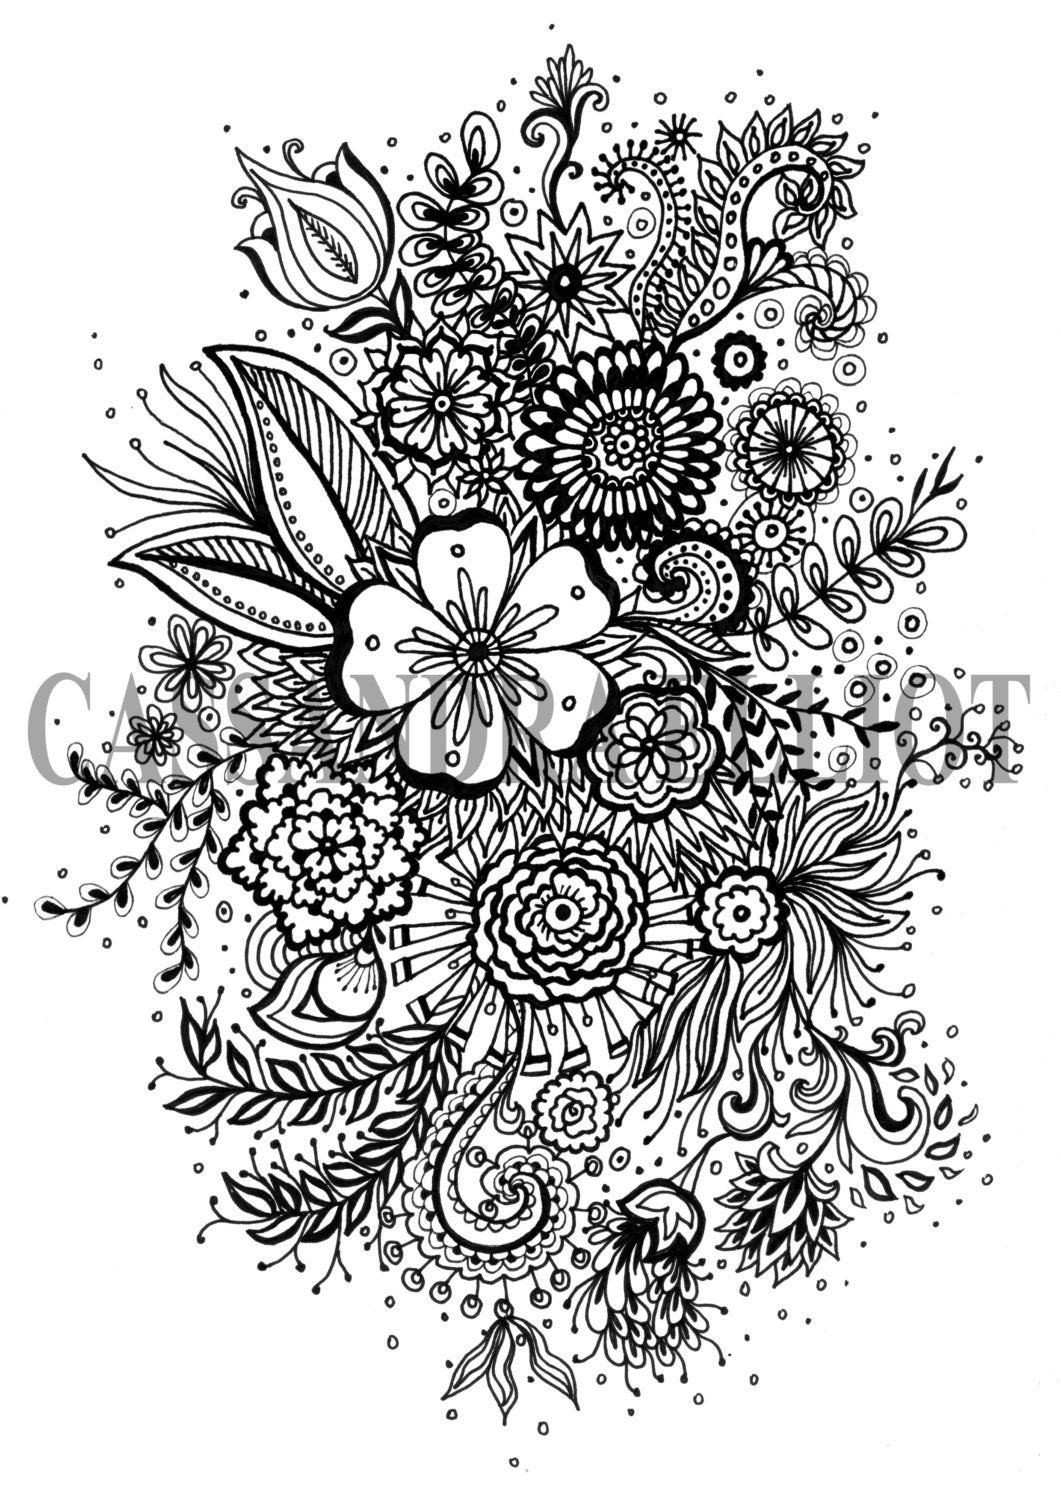 Adult Coloring Pages Patterns Flowers
 Printable Adult Colouring Page Digital Download Print Flower